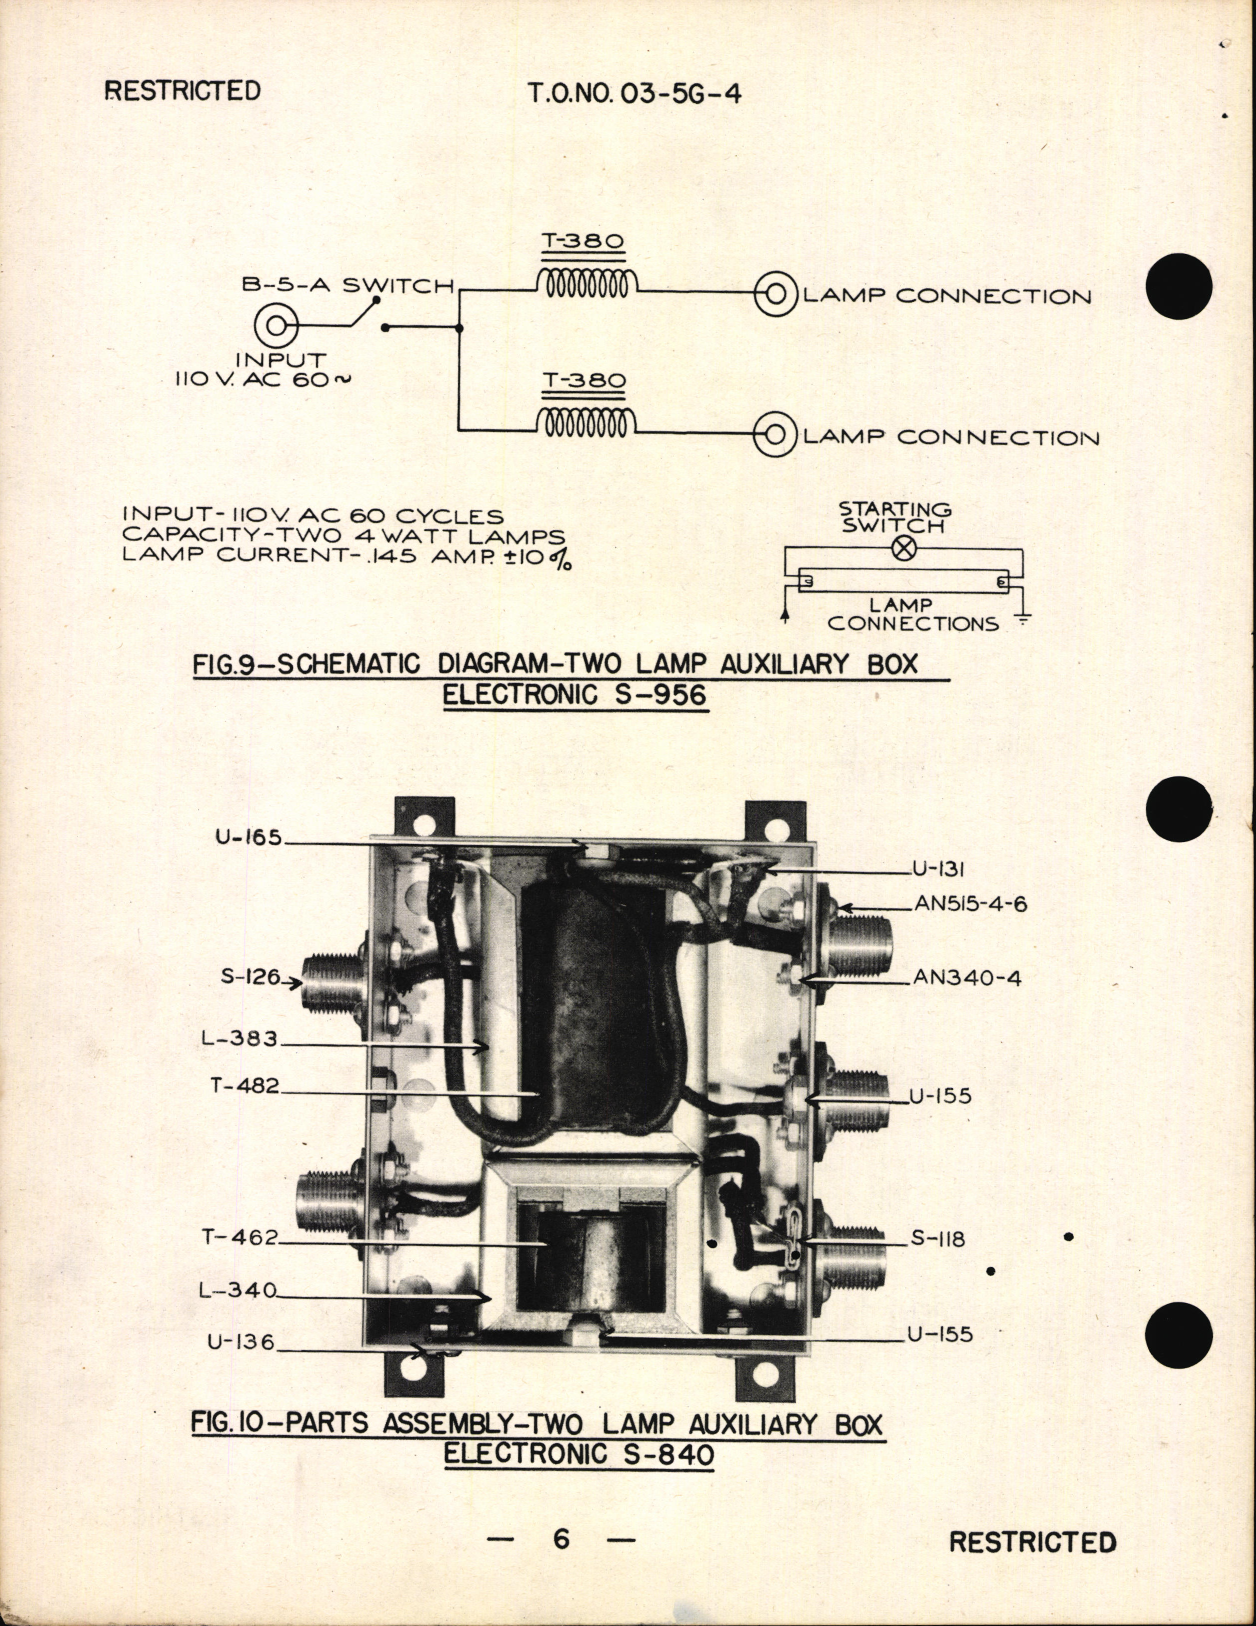 Sample page 8 from AirCorps Library document: Preliminary Handbook of Instructions with Parts Catalog for Fluorescent Lamp Auxiliary Box Assemblies S-840, S-841, S-879, and S-956